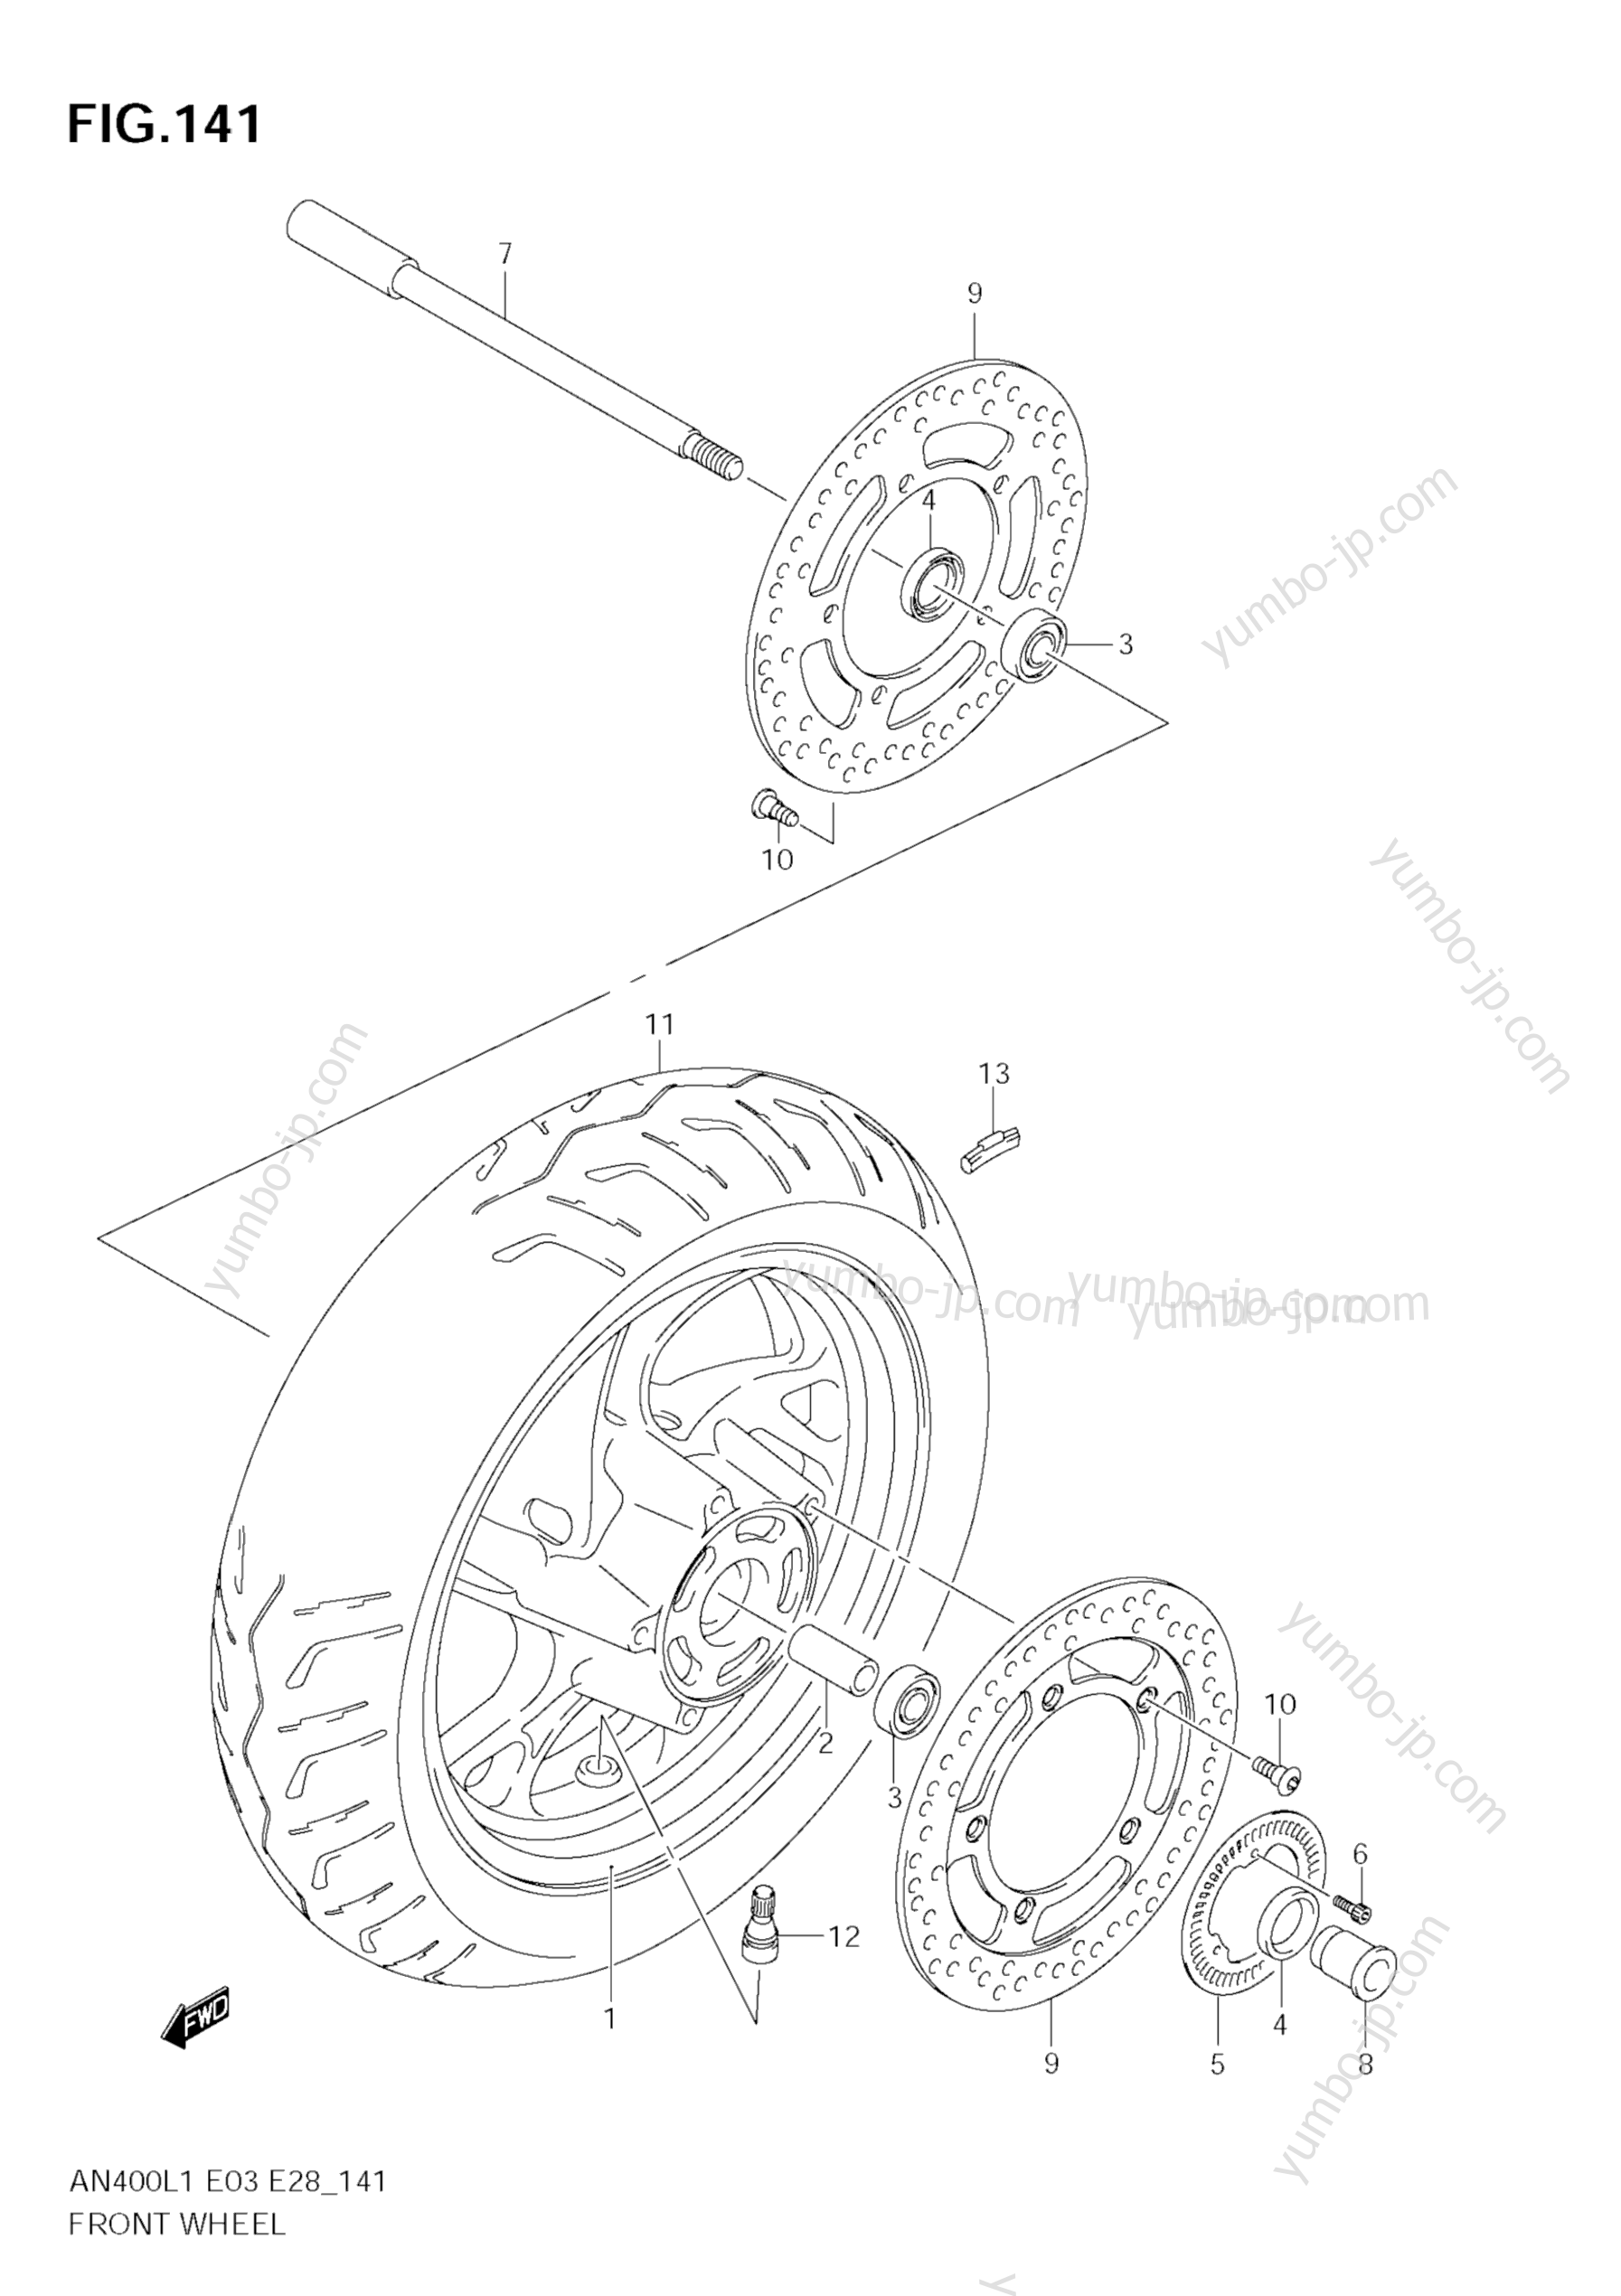 FRONT WHEEL (AN400A L1 E33) for scooters SUZUKI Burgman (AN400) 2011 year